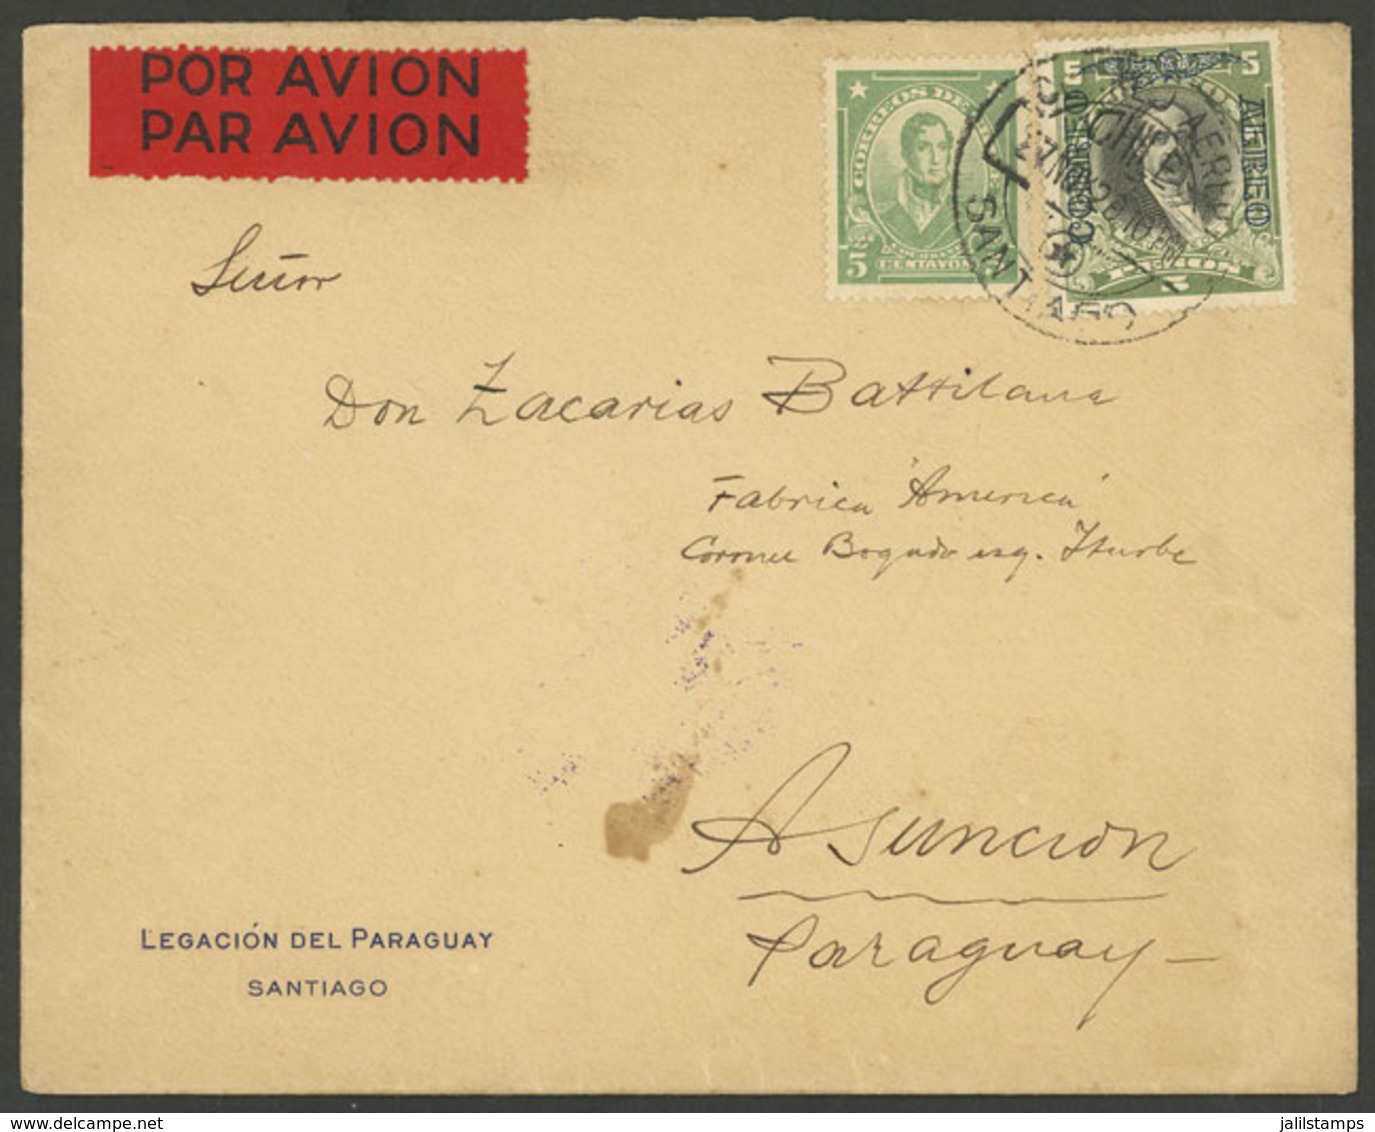 CHILE: 27/NO/1929 Santiago - Paraguay, Airmail Cover Franked With 5.05P., Unusual Destination, VF Quality! - Chile